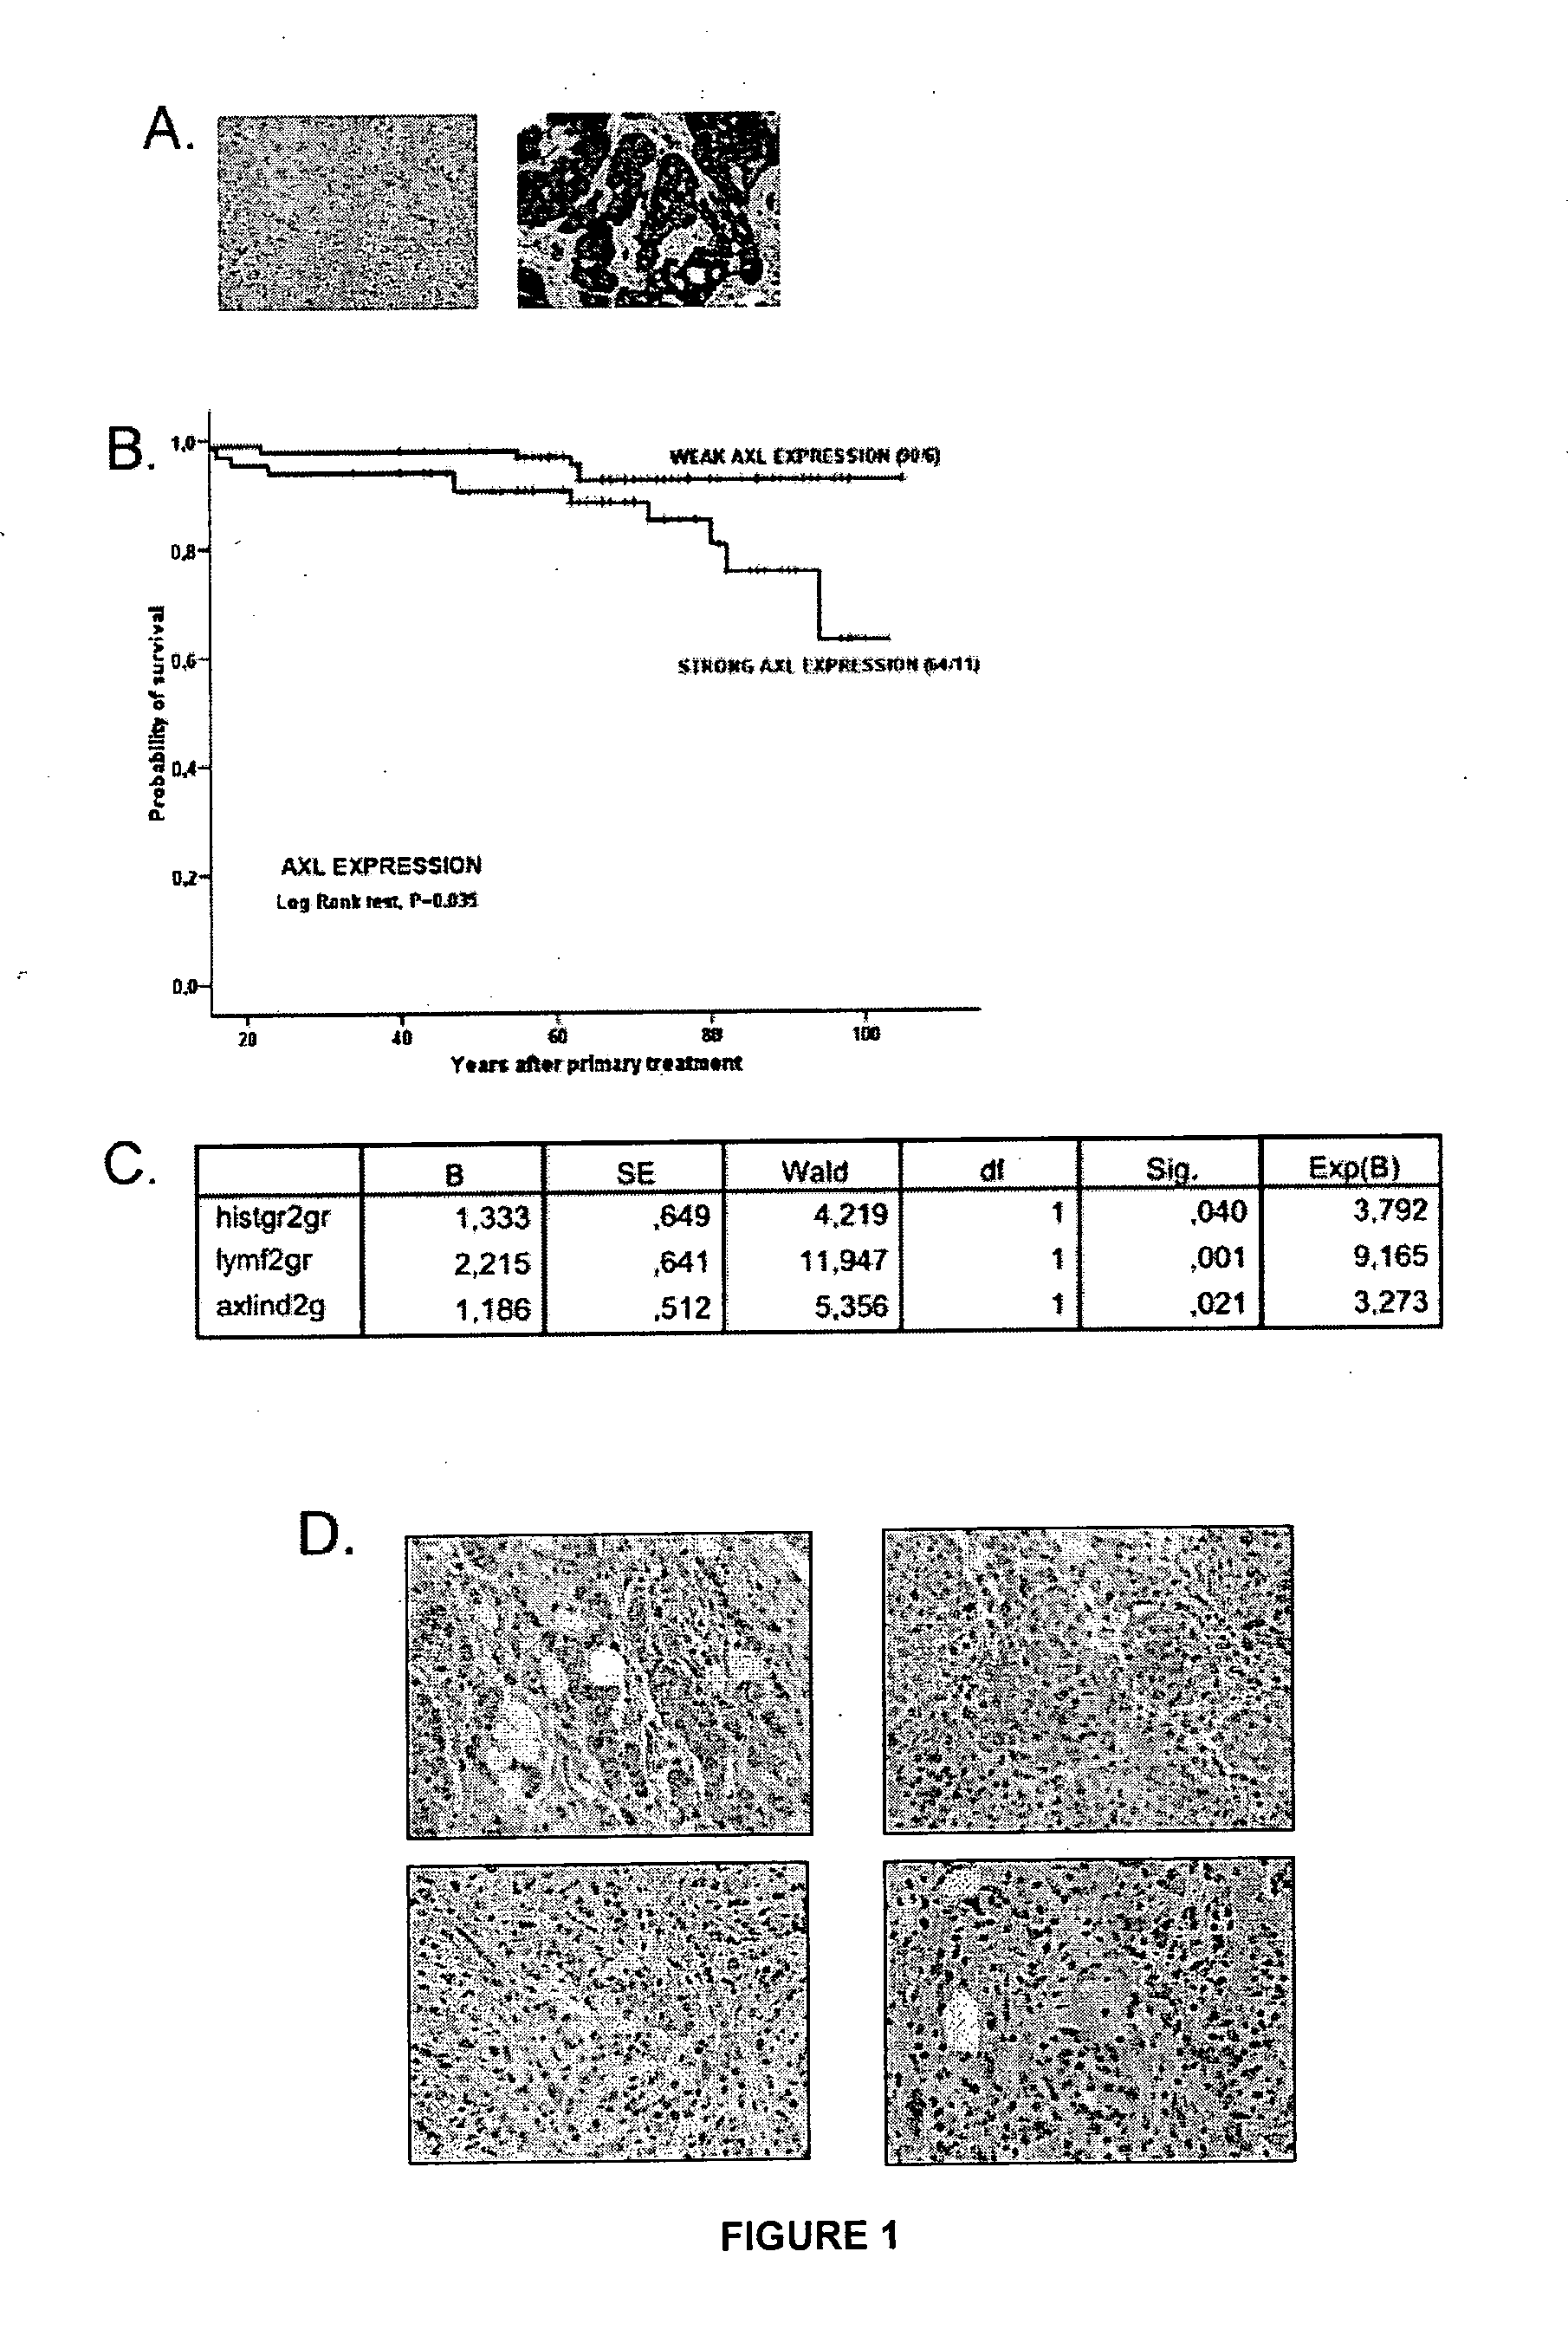 Methods using axl as a biomarker of epithelial-to-mesenchymal transition